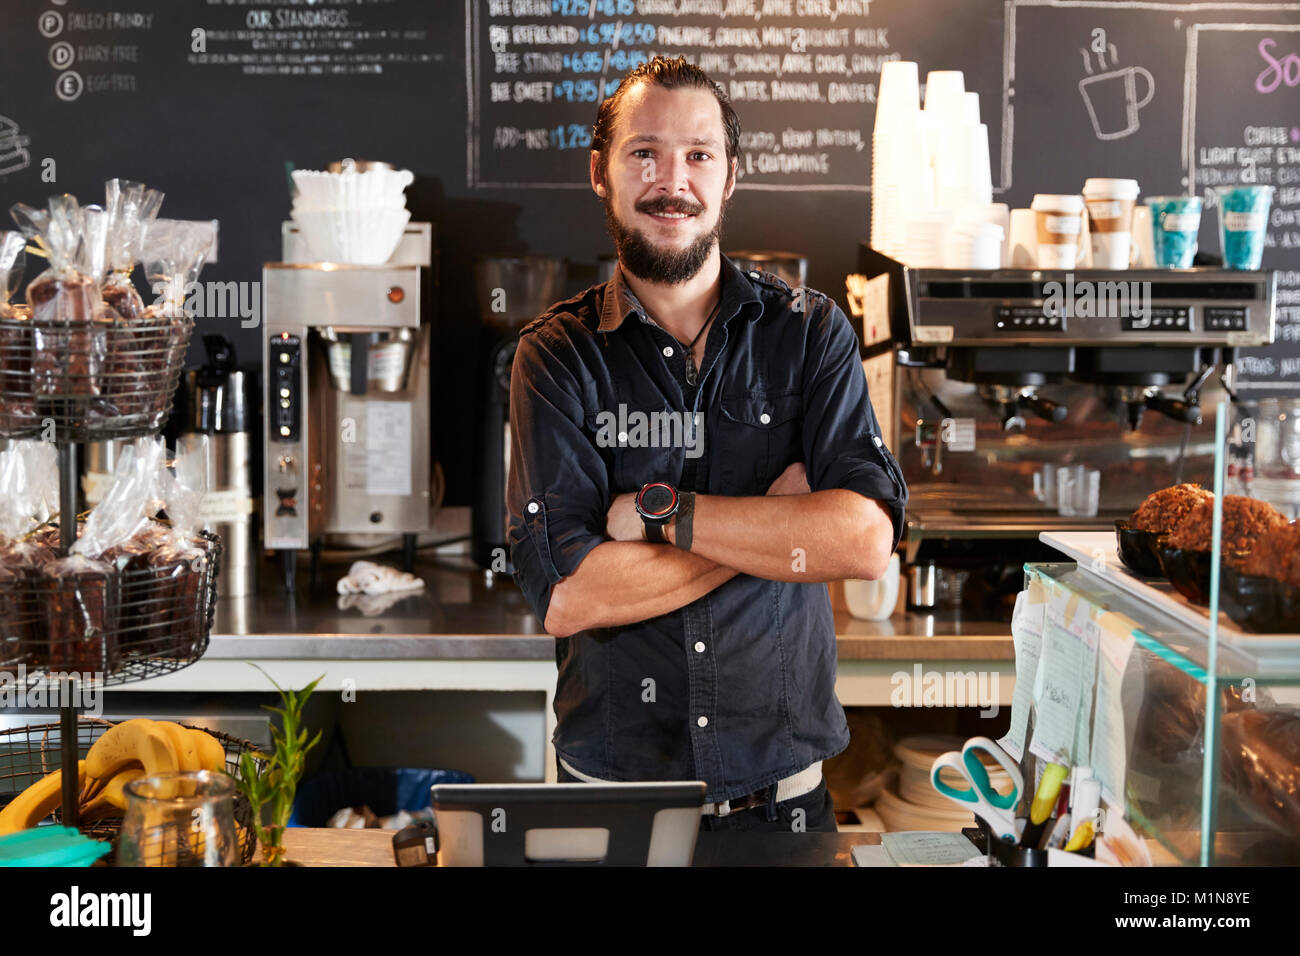 Portrait Of Male Barista Behind Counter In Coffee Shop Stock Photo